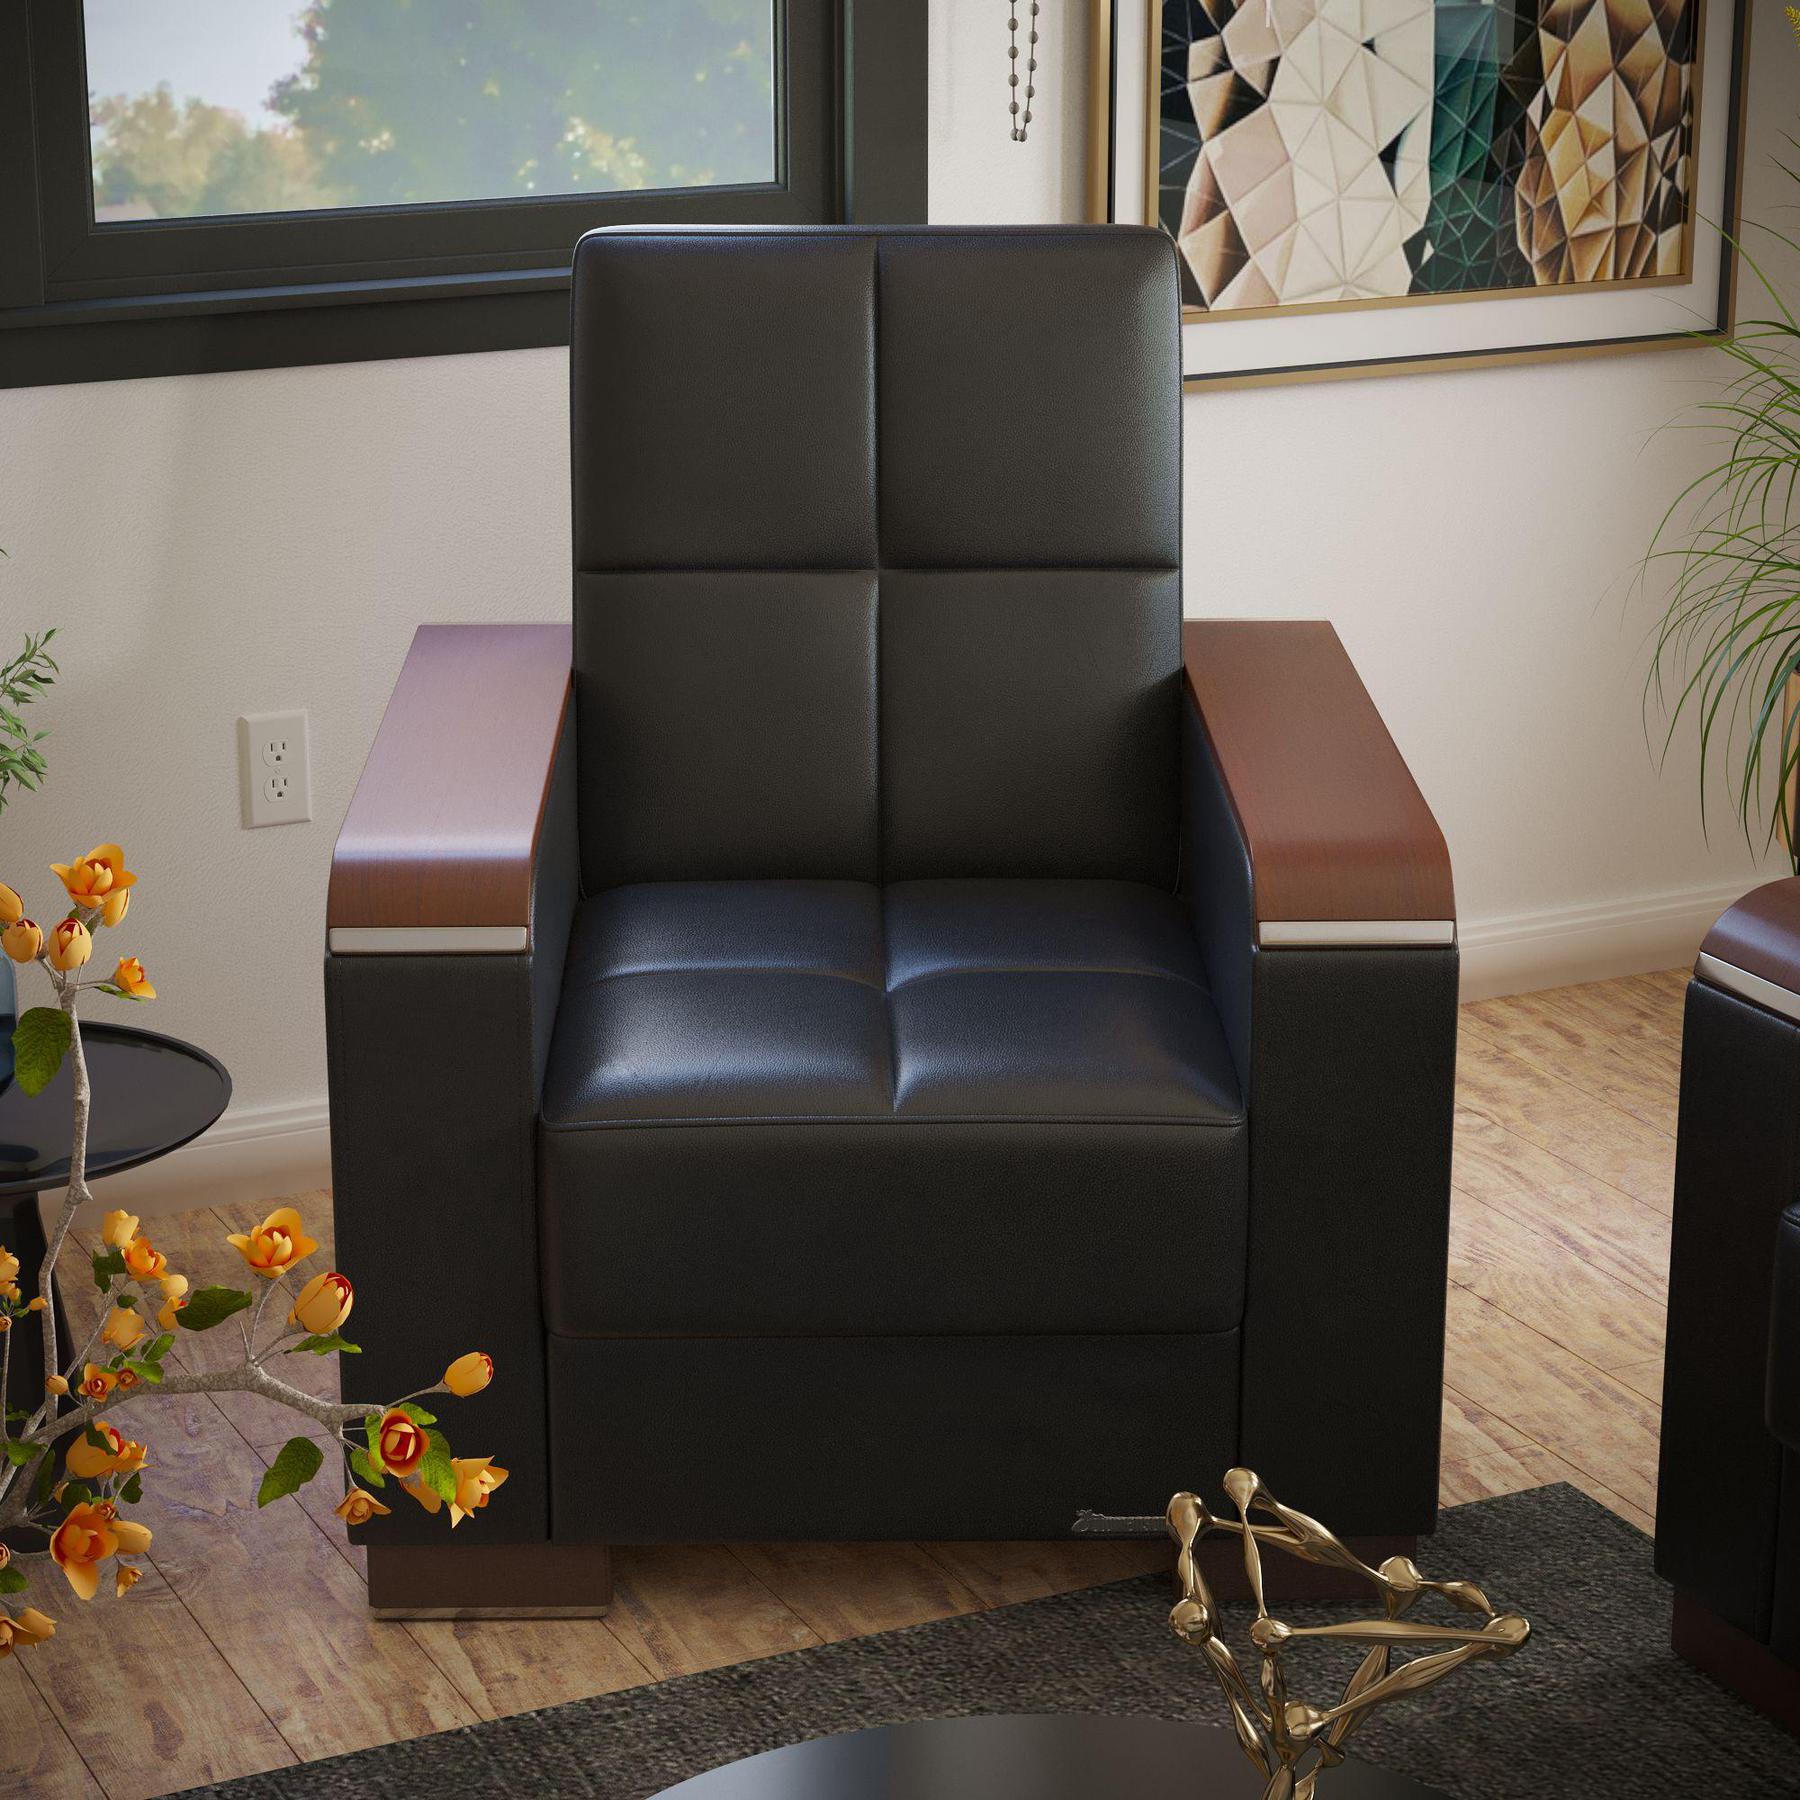 Modern design, Black , Artificial Leather upholstered convertible Armchair with underseat storage from Voyage Luxe by Ottomanson in living room lifestyle setting by itself. This Armchair measures 38 inches width by 36 inches depth by 41 inches height.